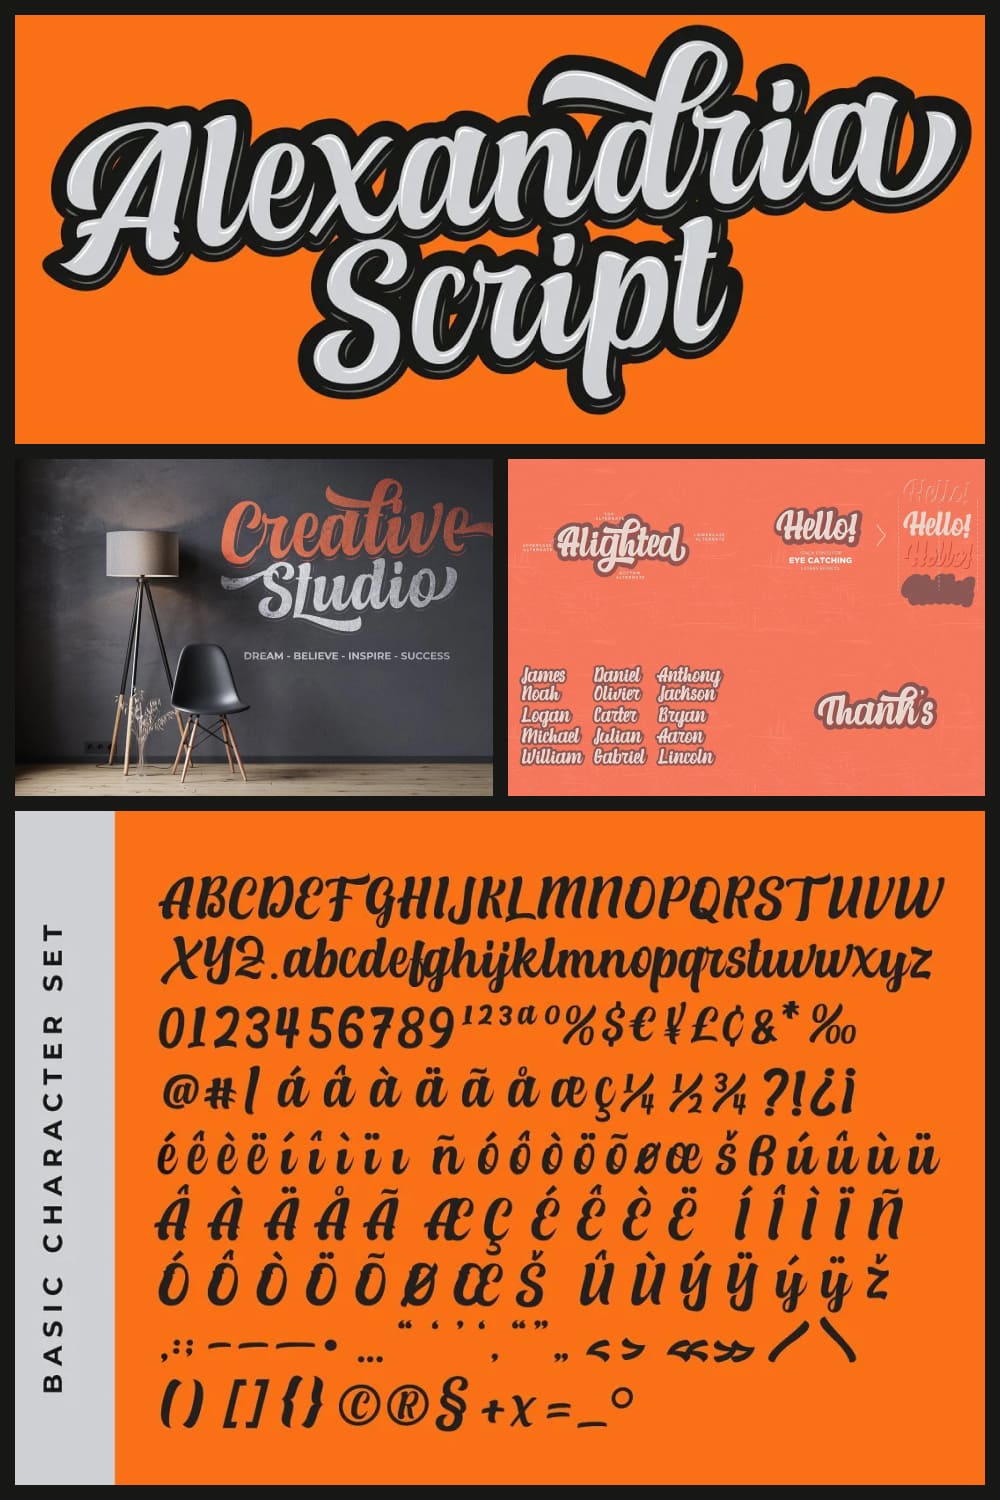 This font is suitable for young, passionate design, such as logo design, t-shirts, branding, and various other design purposes.